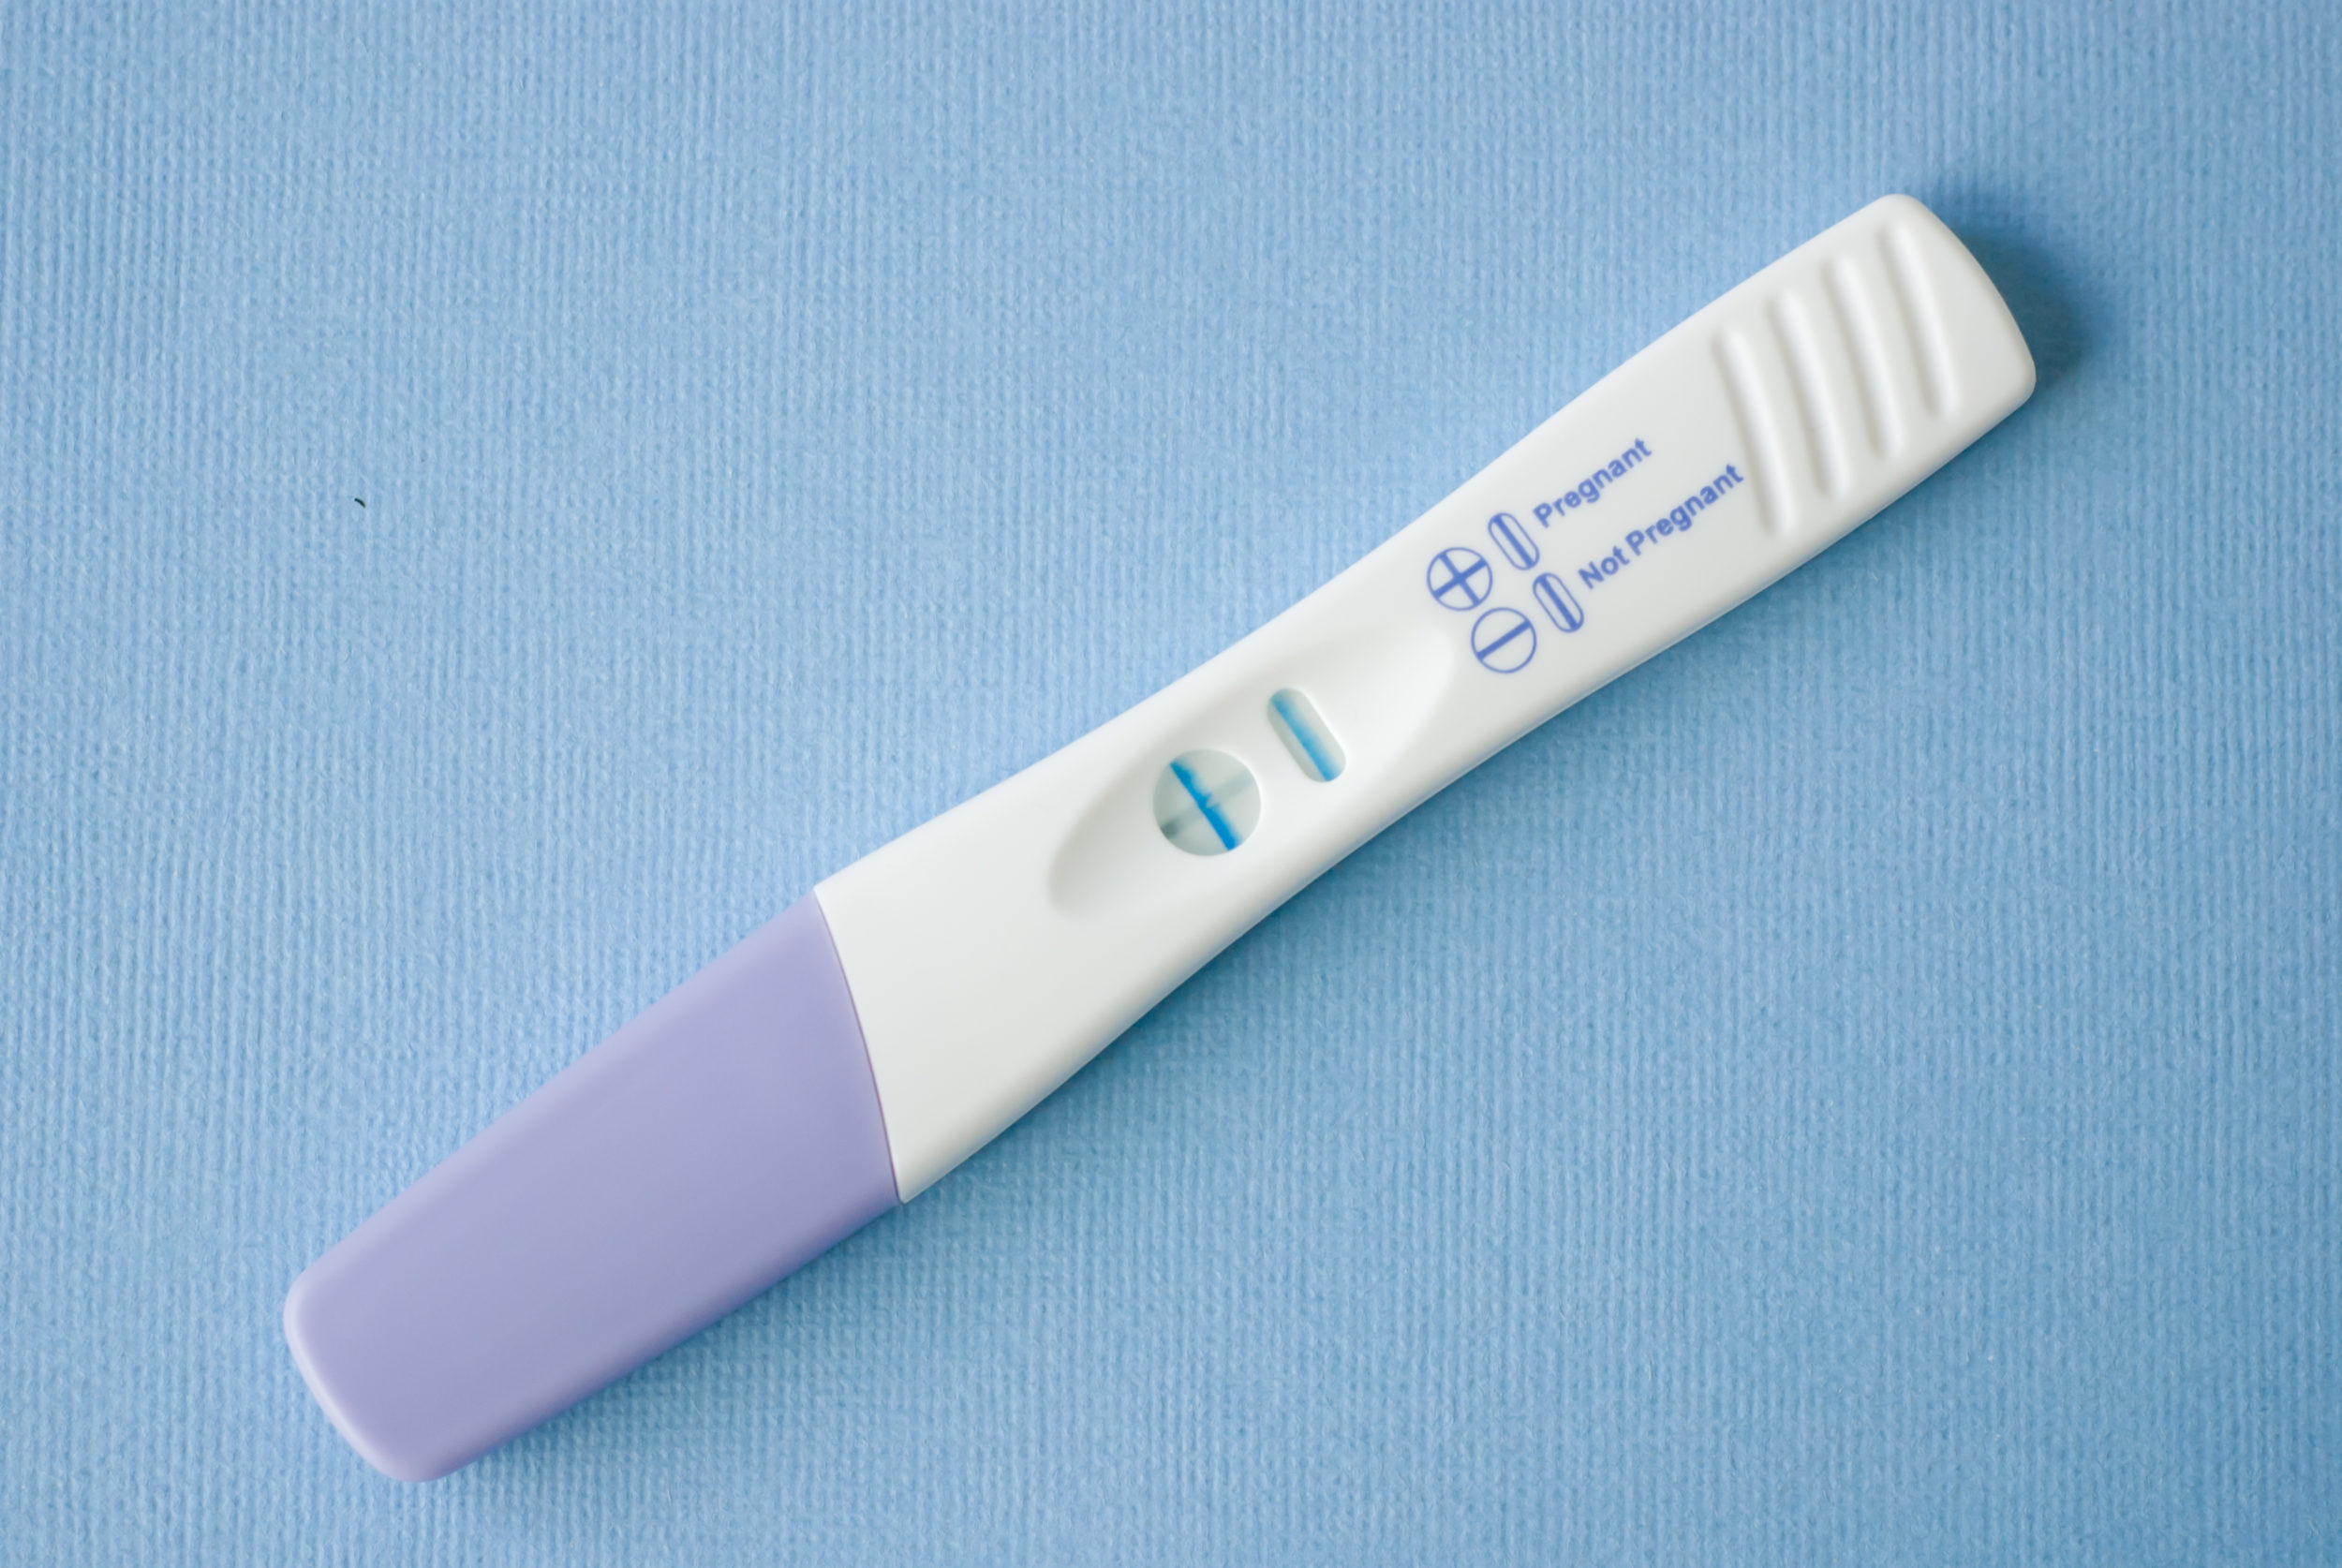 At Home Pregnancy Test